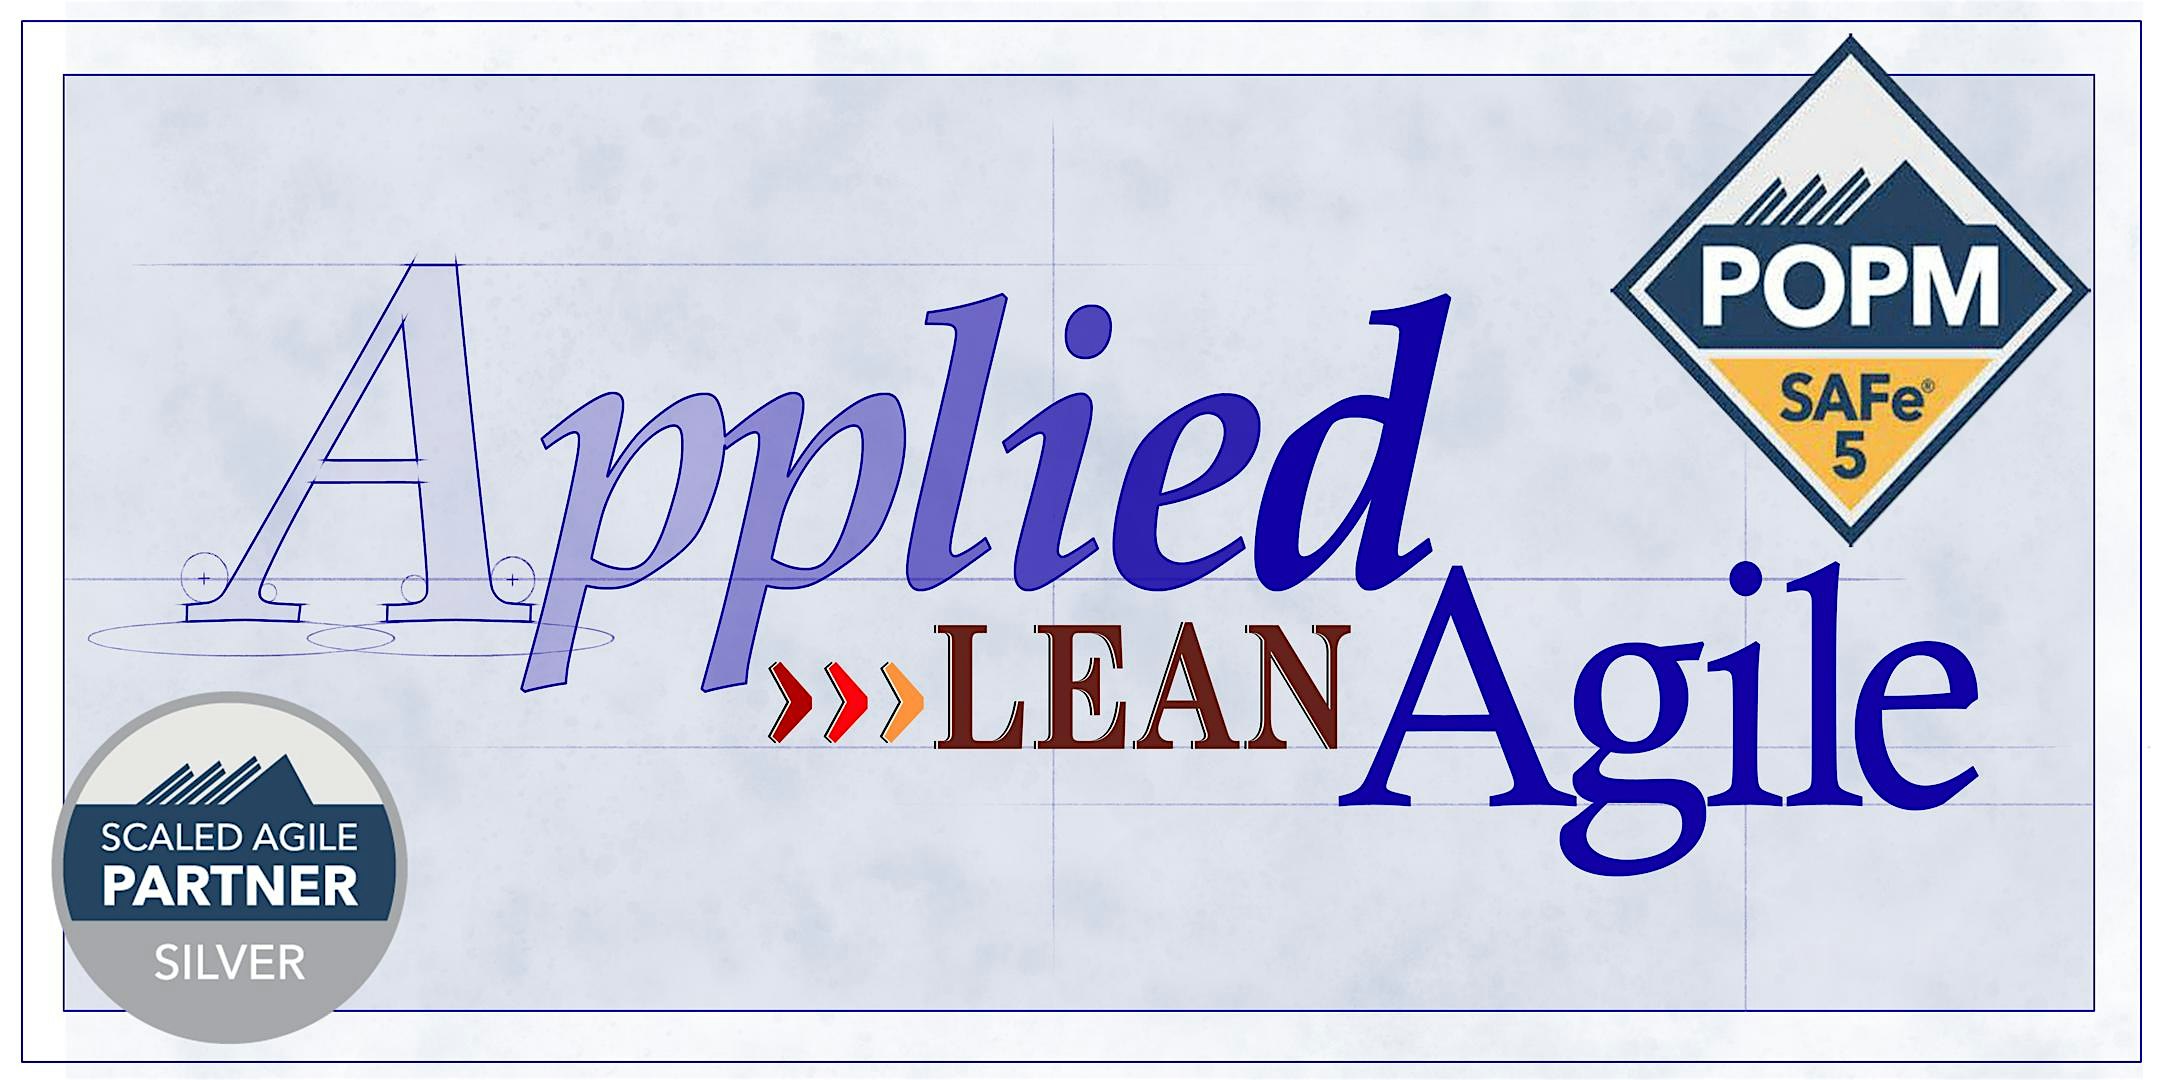 SAFe\u00ae For Teams 5.1 ONLINE Oct 15-16.  Delivered by Applied Lean Agile